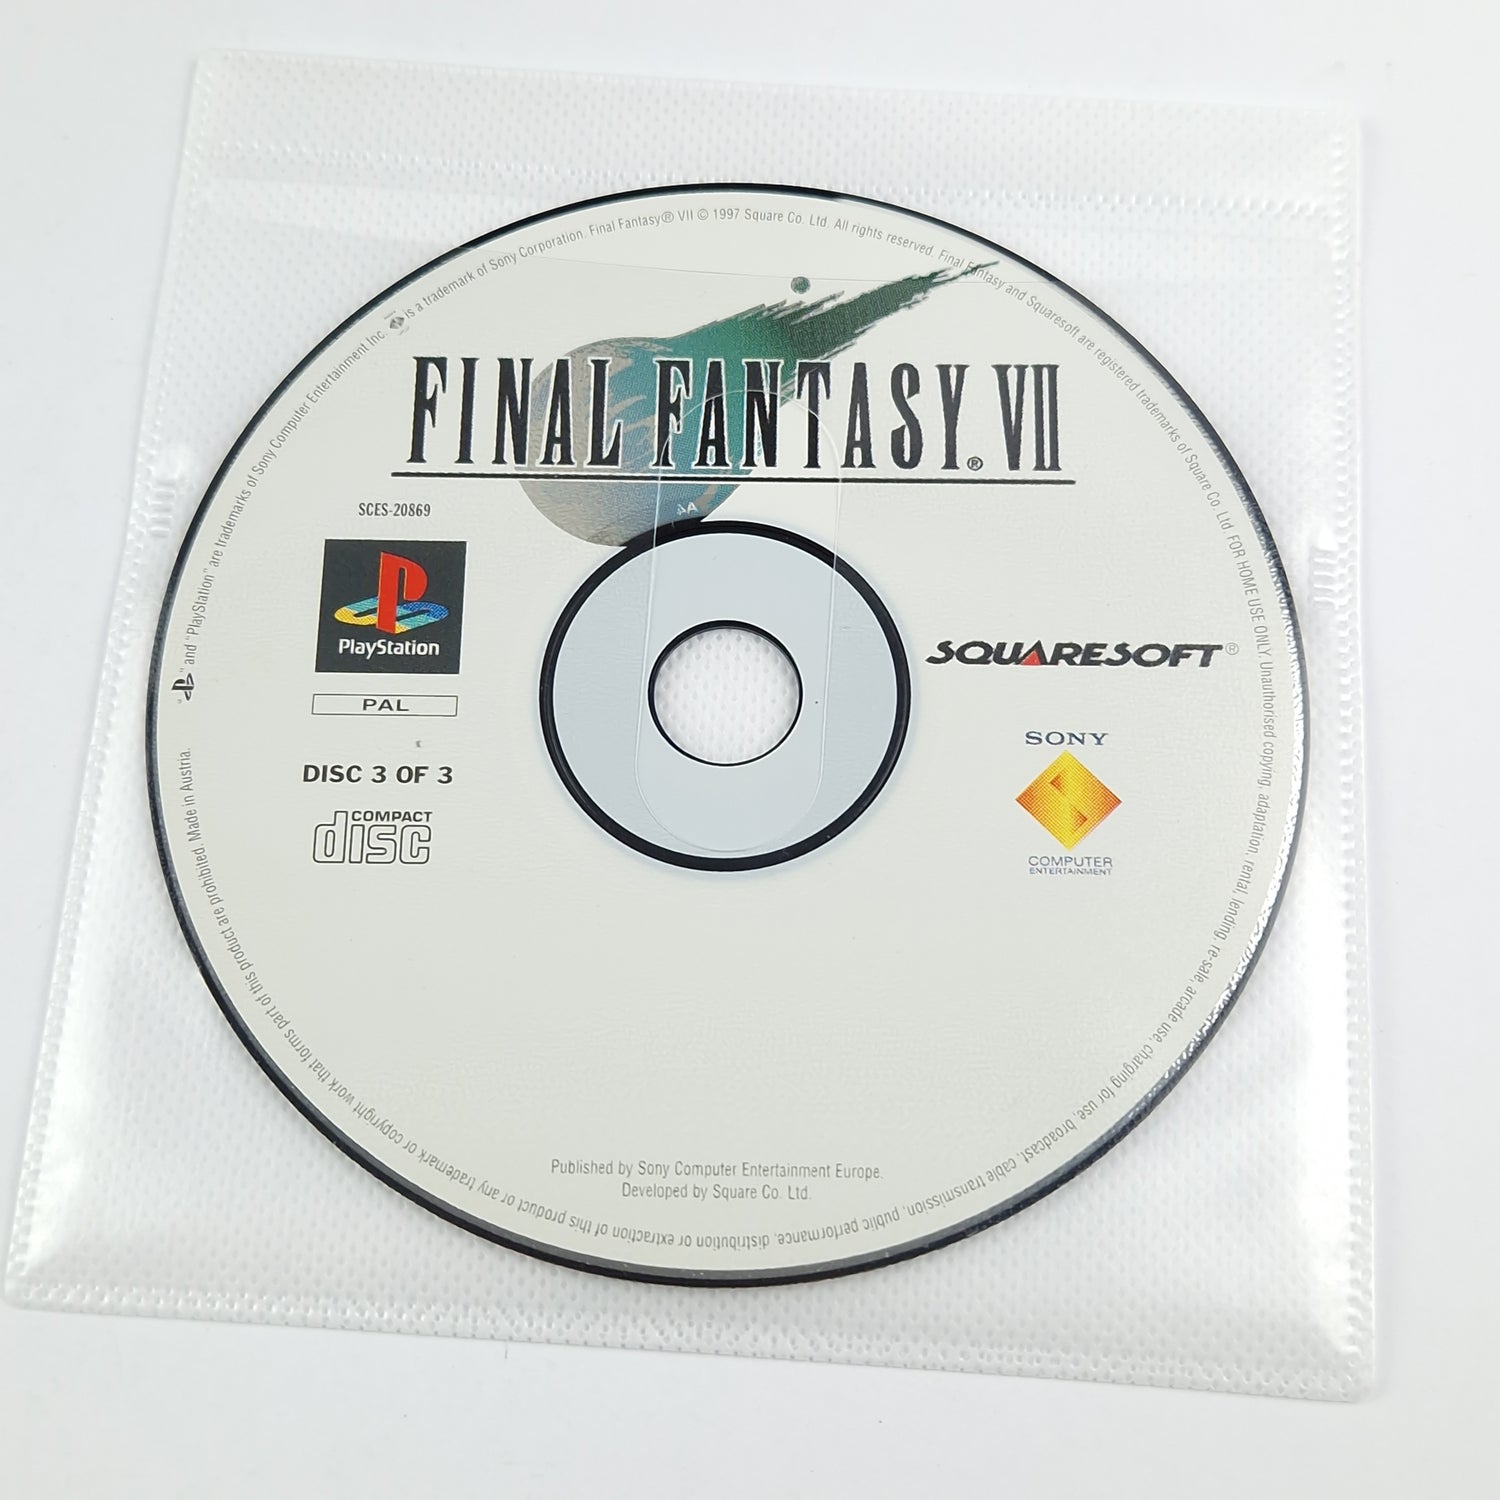 Playstation 1 game: Final Fantasy VII 7 - CD + instructions with solution book PS1